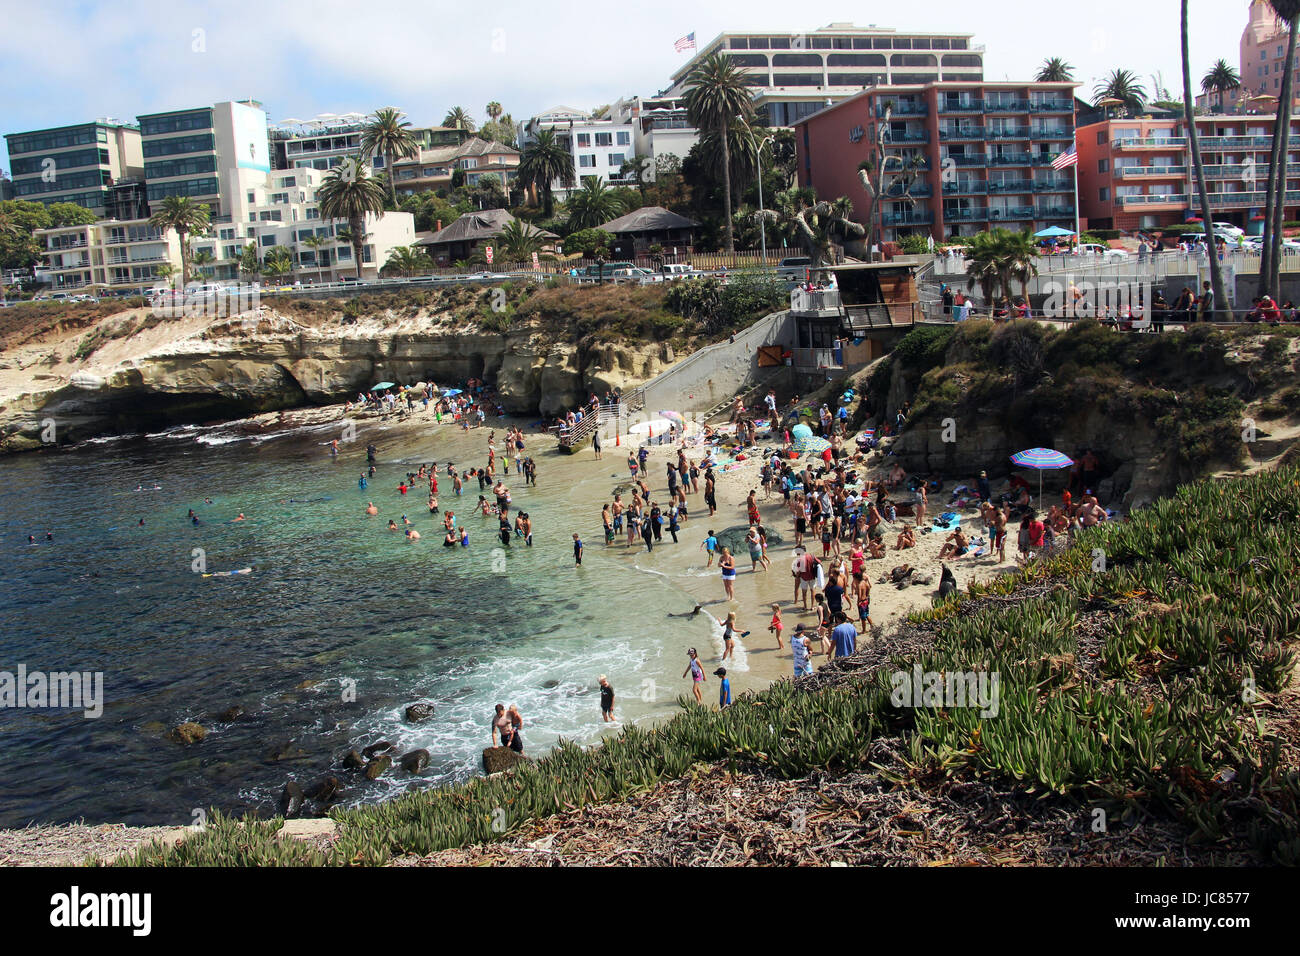 Vacationers hanging out at the crowded Beach on a summer day in La Jolla Cove, San Diego, California. The picture was taken in July 2016. Stock Photo